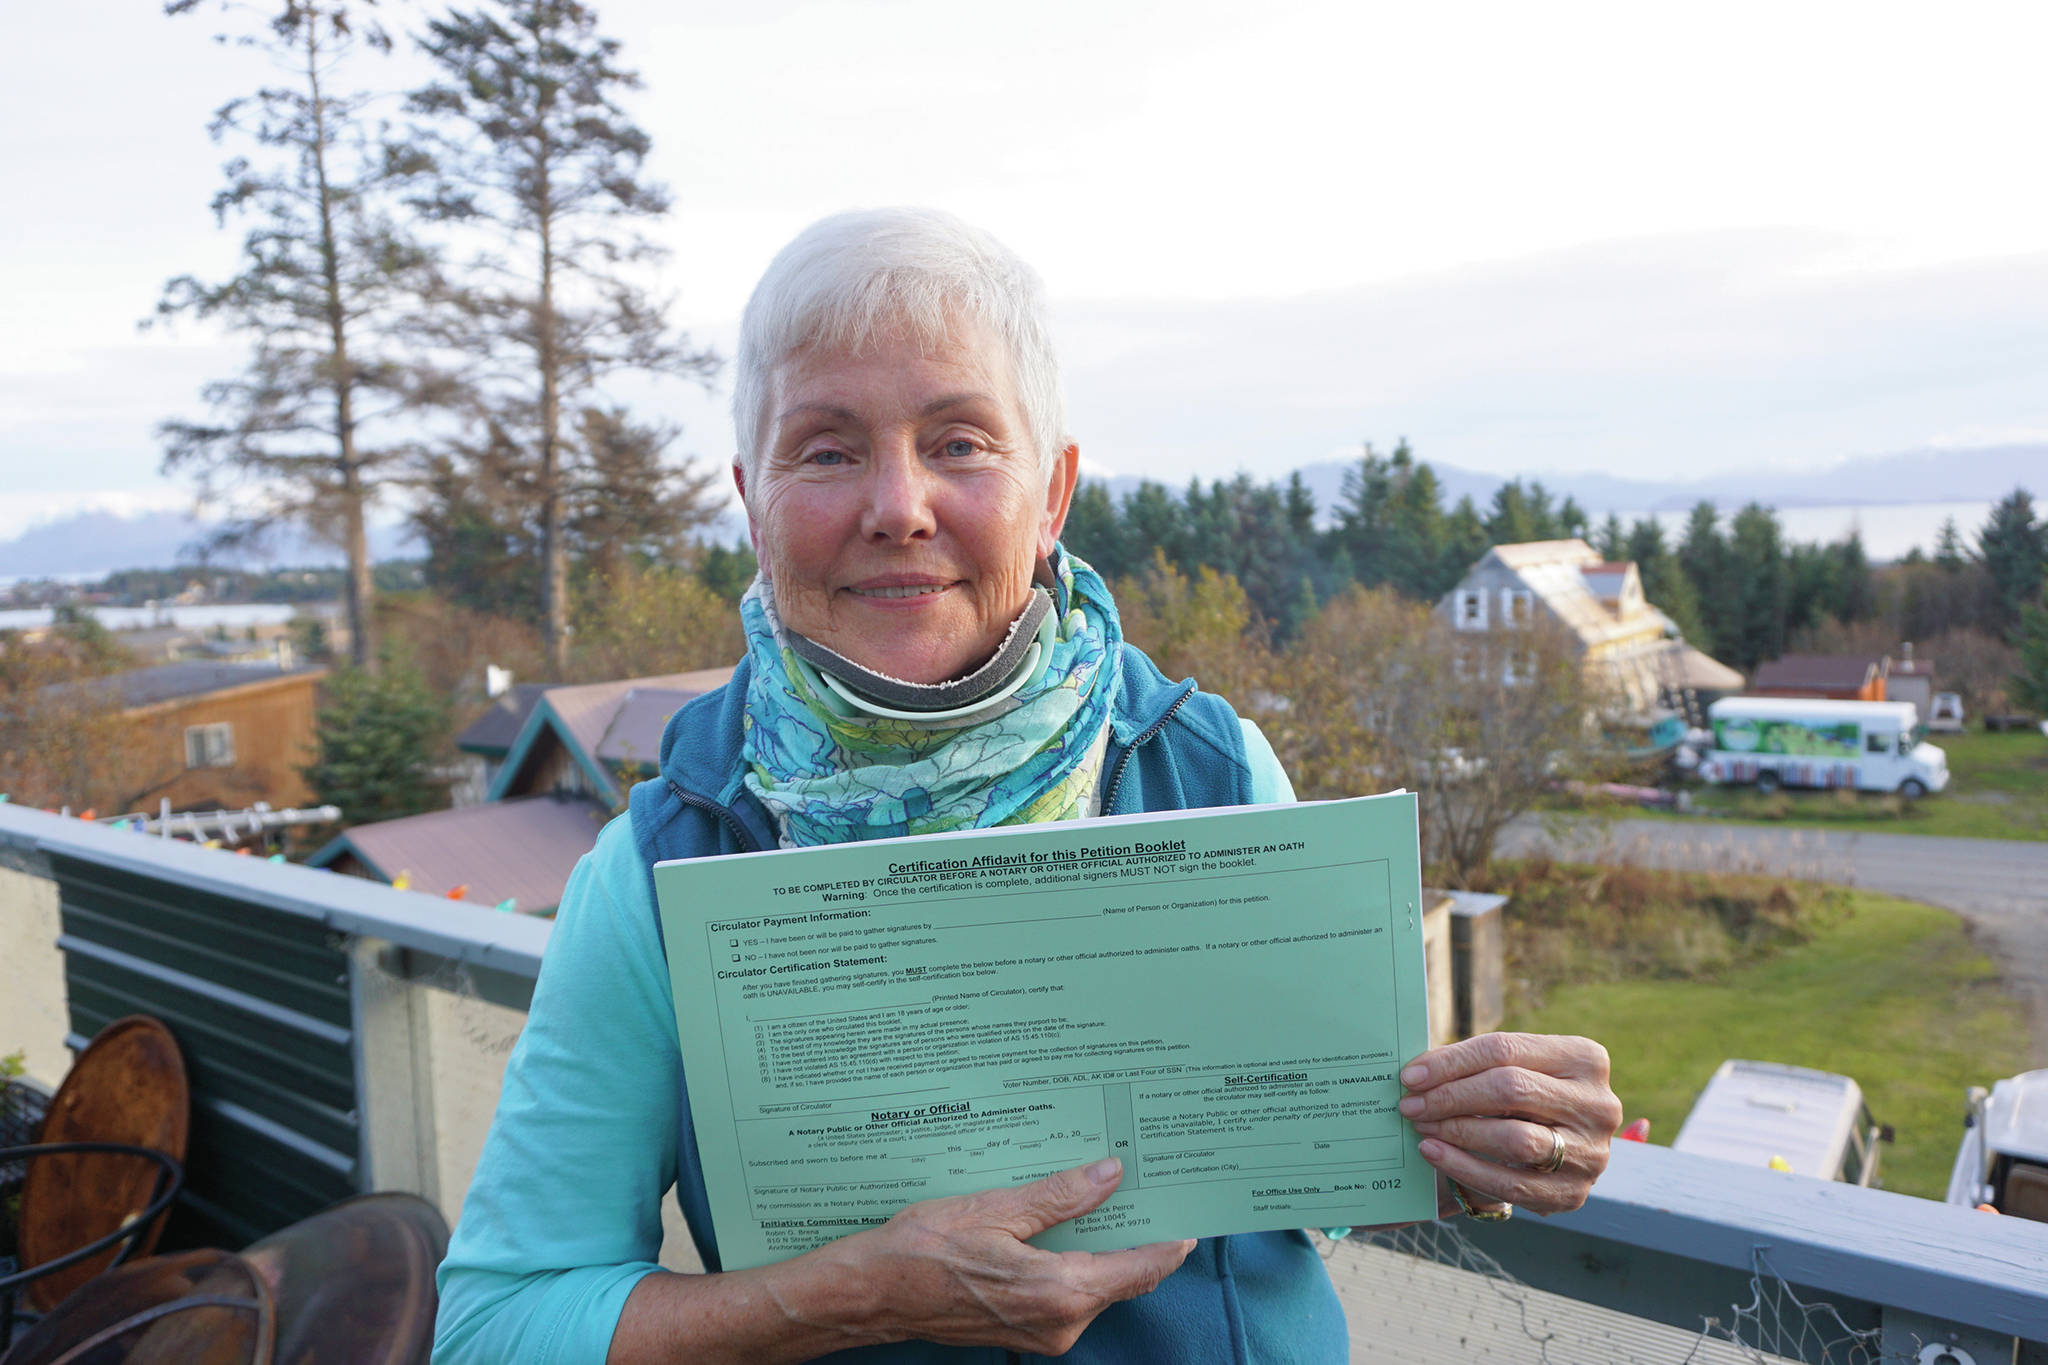 Fair Share Act sponsor Jane Angvik holds an initiative petition booklet she delivered to Homer, Alaska, on Oct. 25, 2019. (Photo by Michael Armstrong/Homer News)